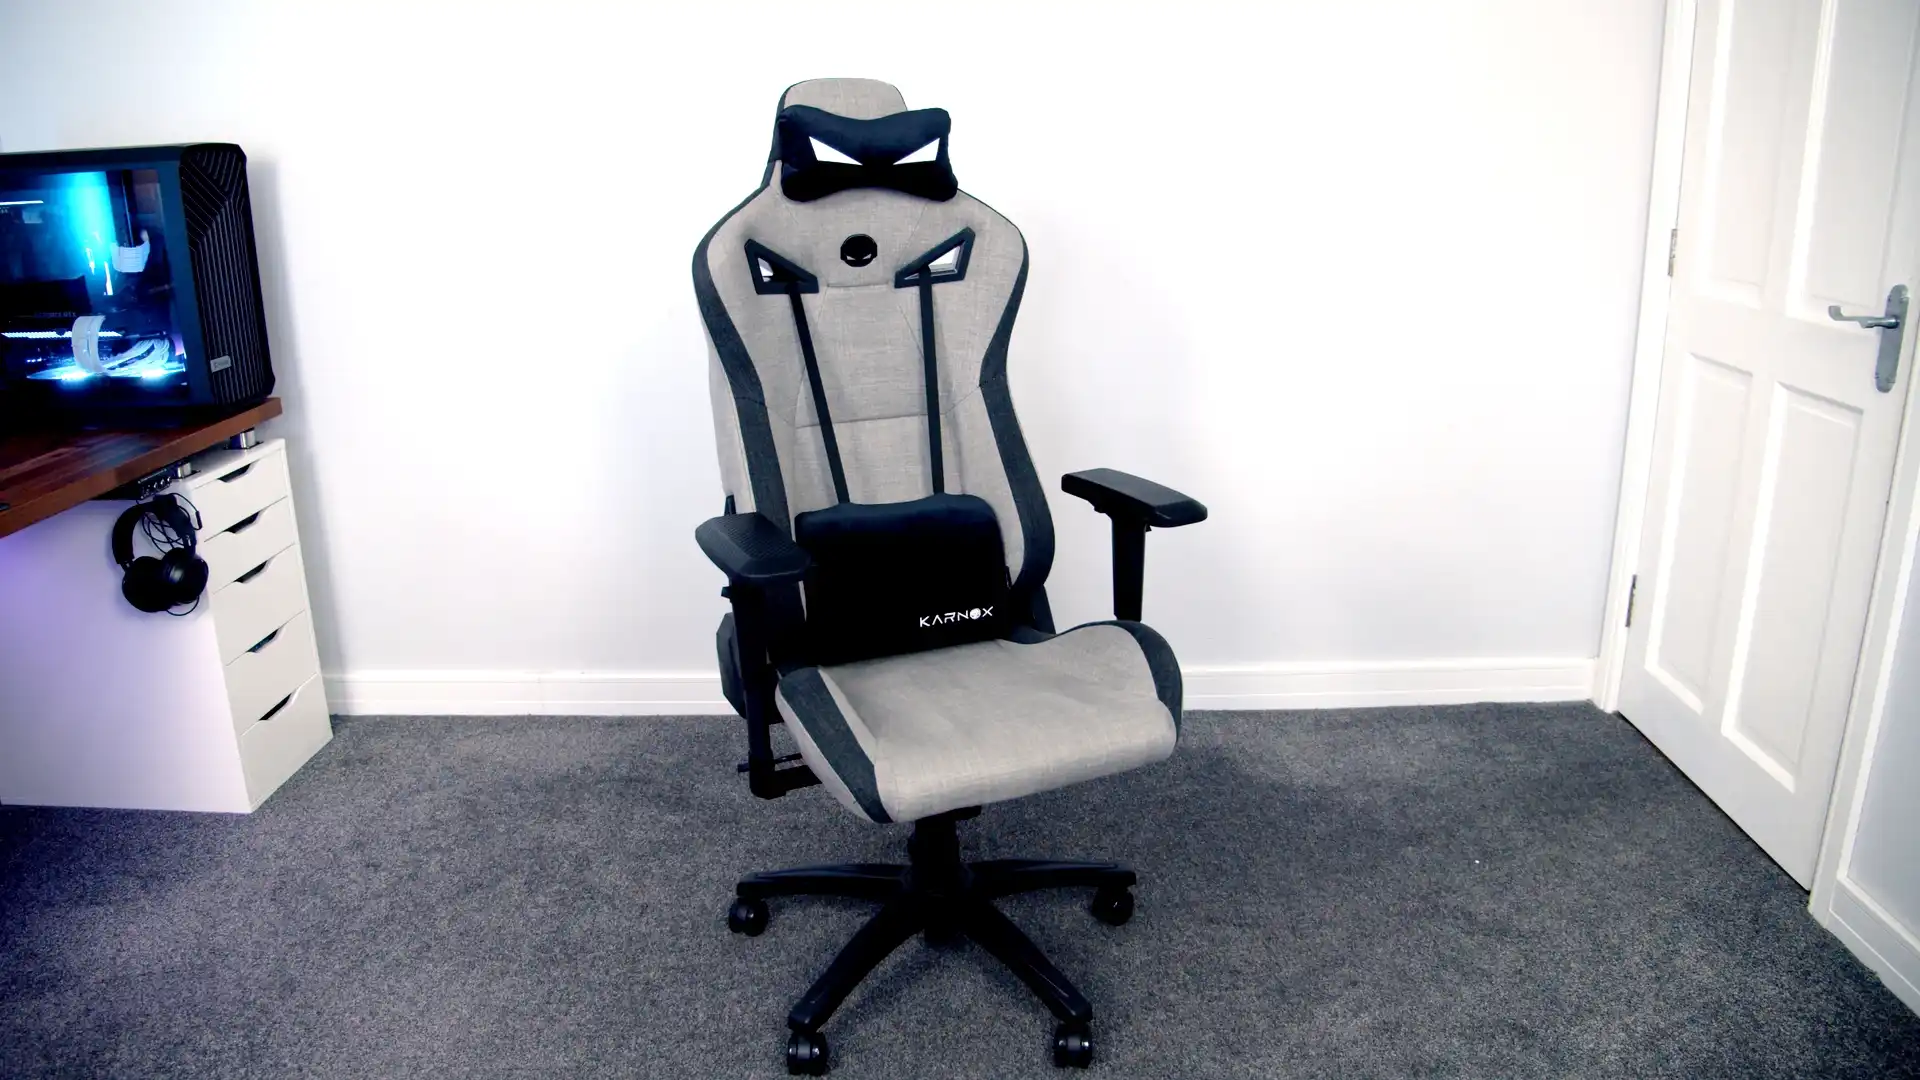 Karnox Gaming Chair Features